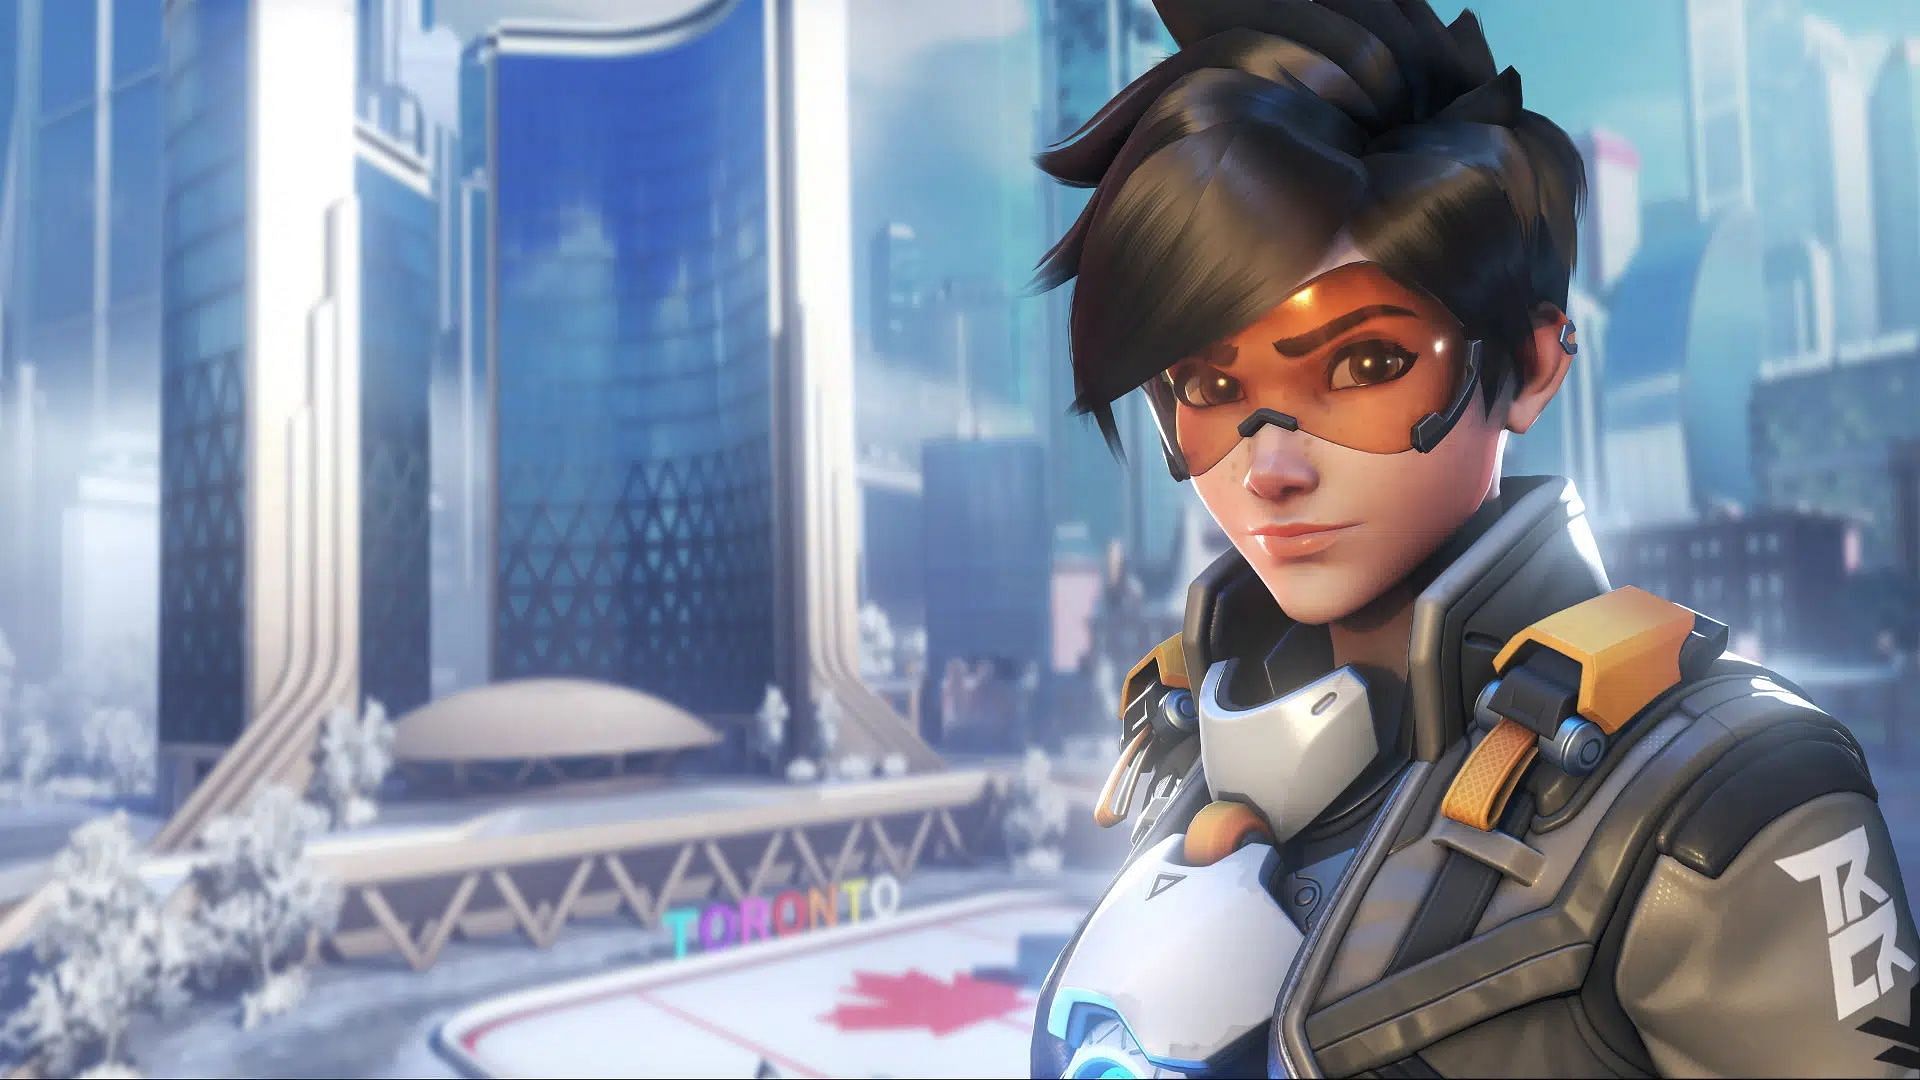 Overwatch 2 - Tracer (Image via Blizzard Entertainment)